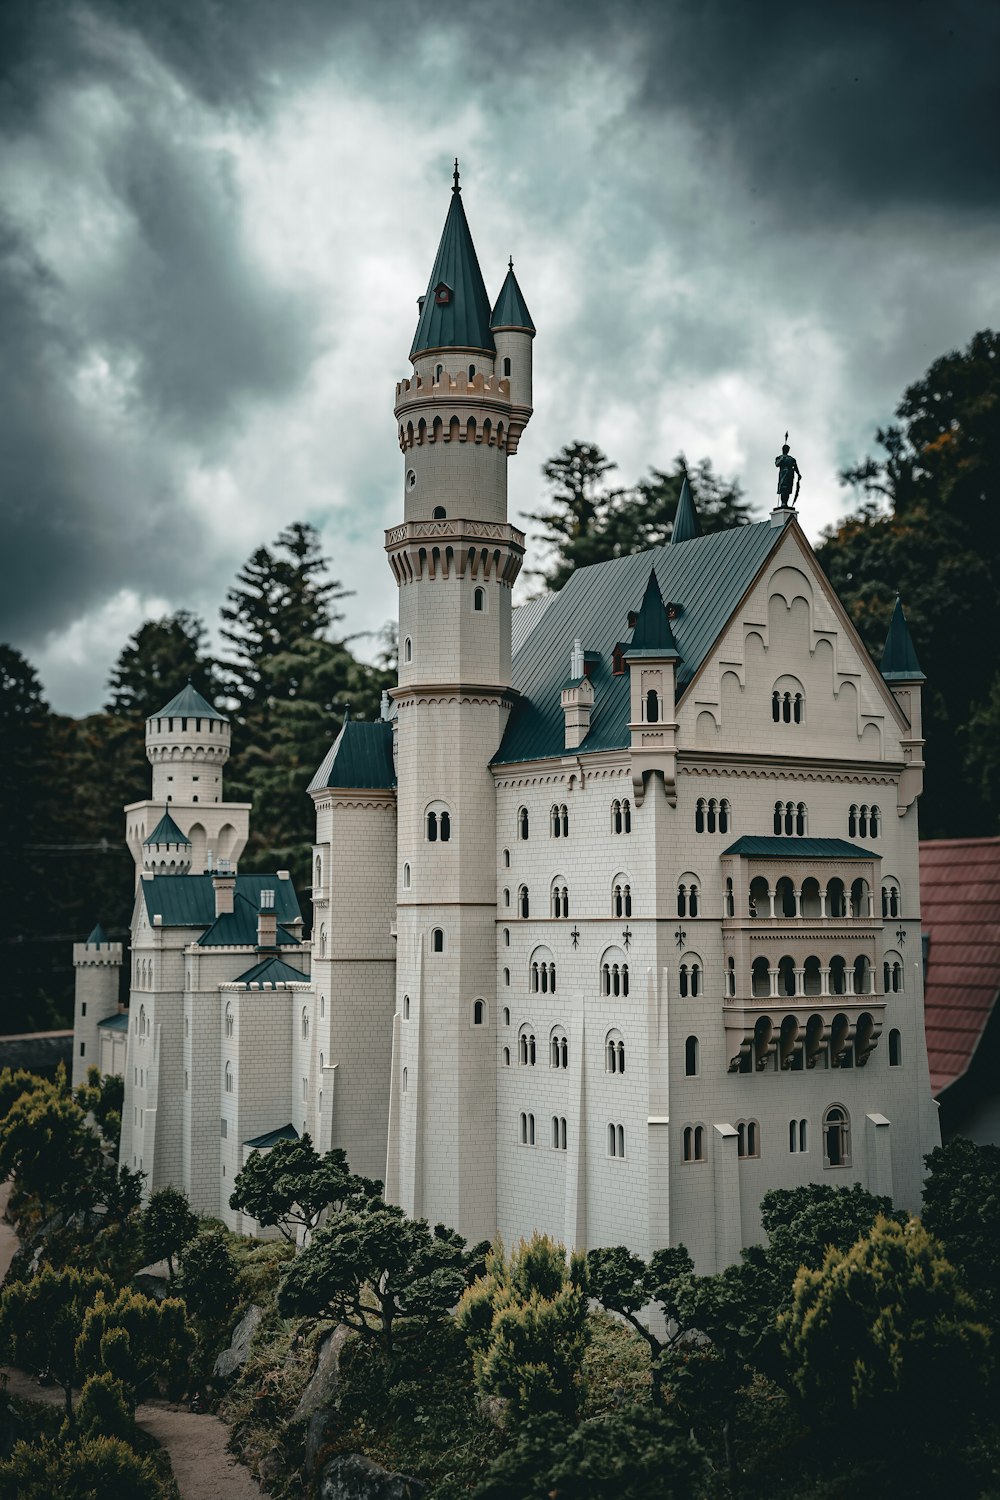 a large white castle with Neuschwanstein Castle in the background